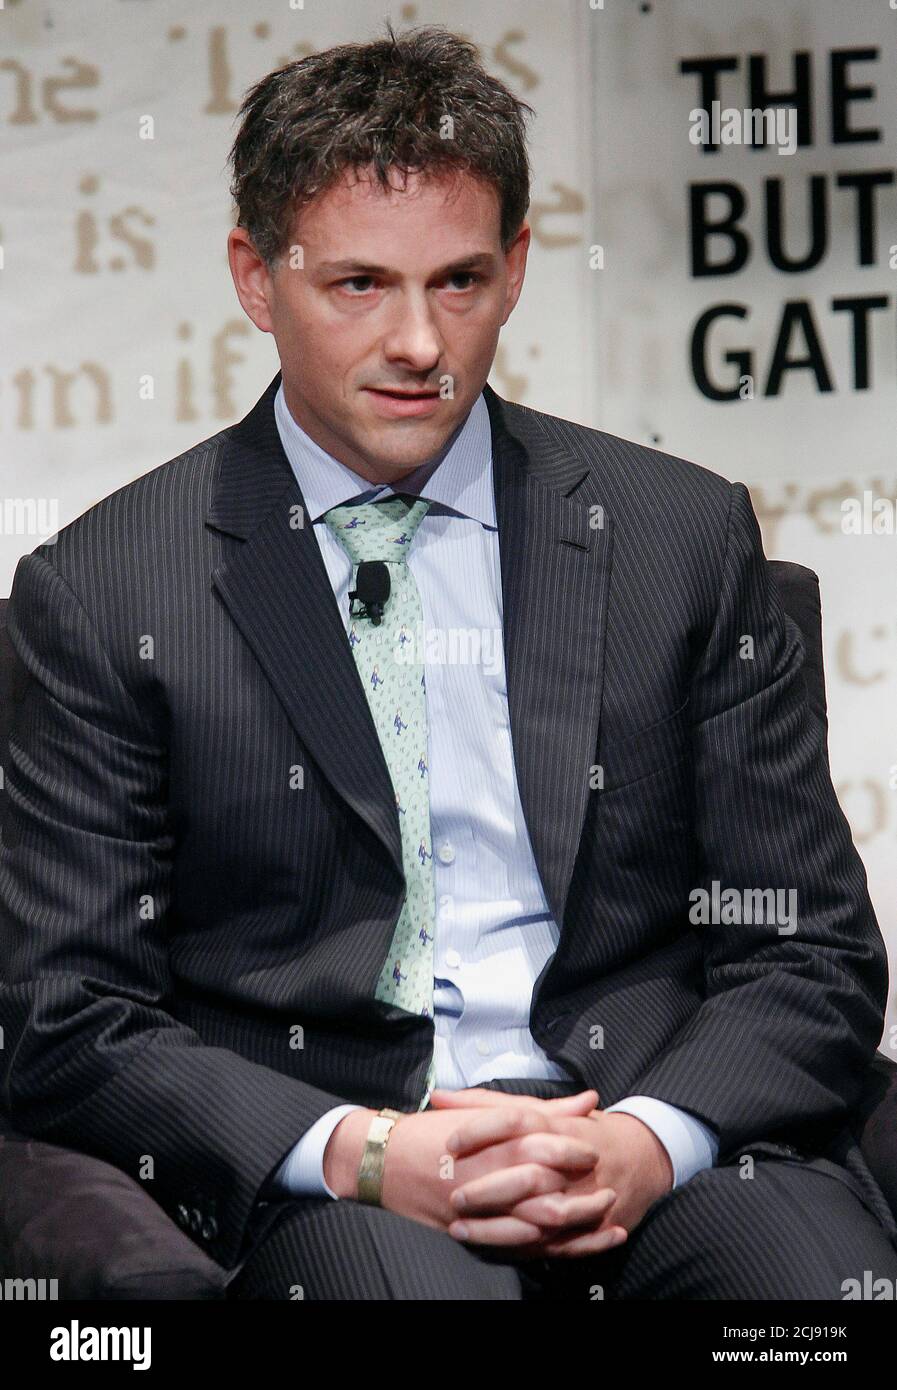 David Einhorn, founder and president of Greenlight Capital, speaks during  The Economist's Buttonwood Gathering in New York October 25, 2012.  REUTERS/Carlo Allegri (UNITED STATES - Tags: BUSINESS Stock Photo - Alamy